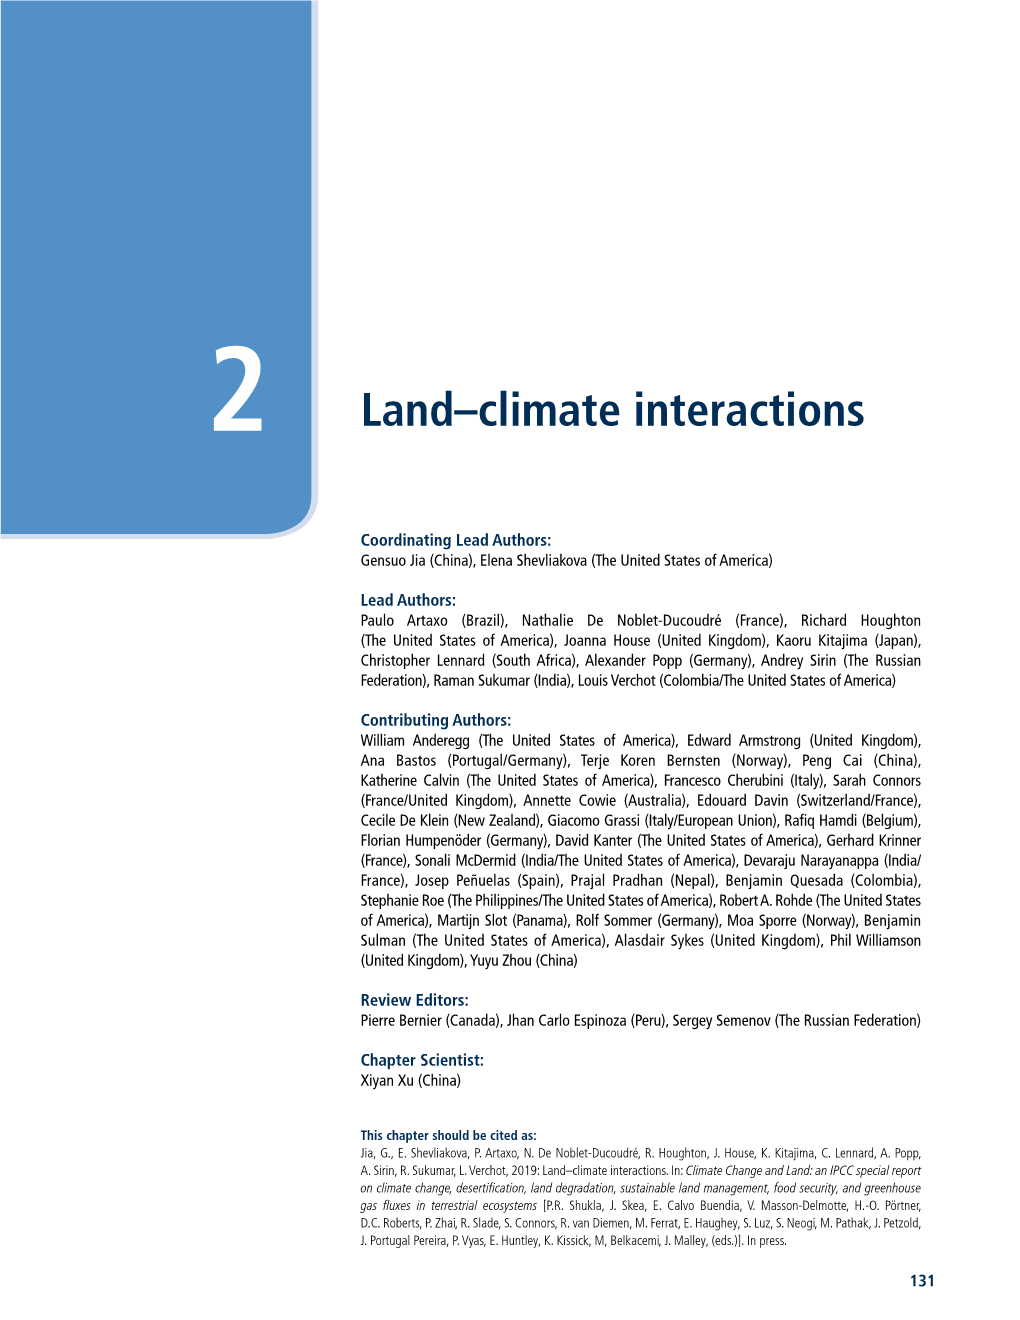 Land–Climate Interactions